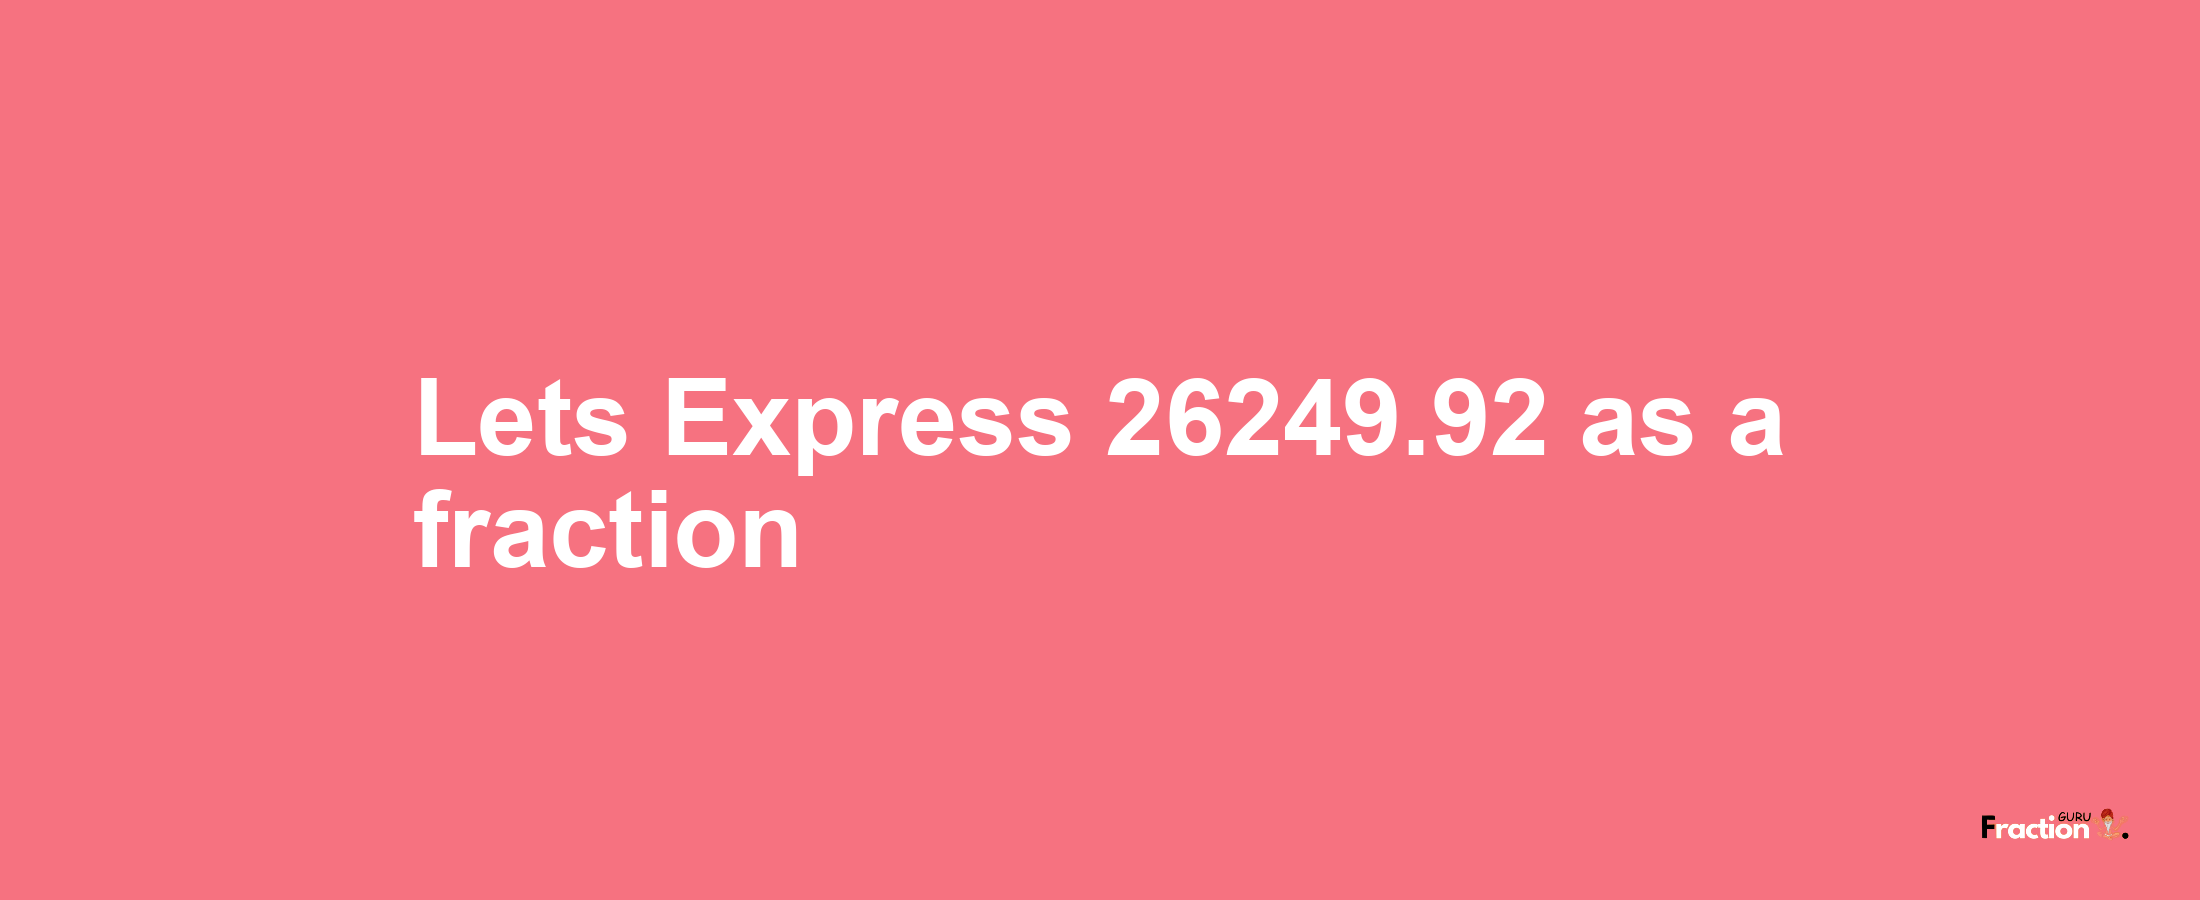 Lets Express 26249.92 as afraction